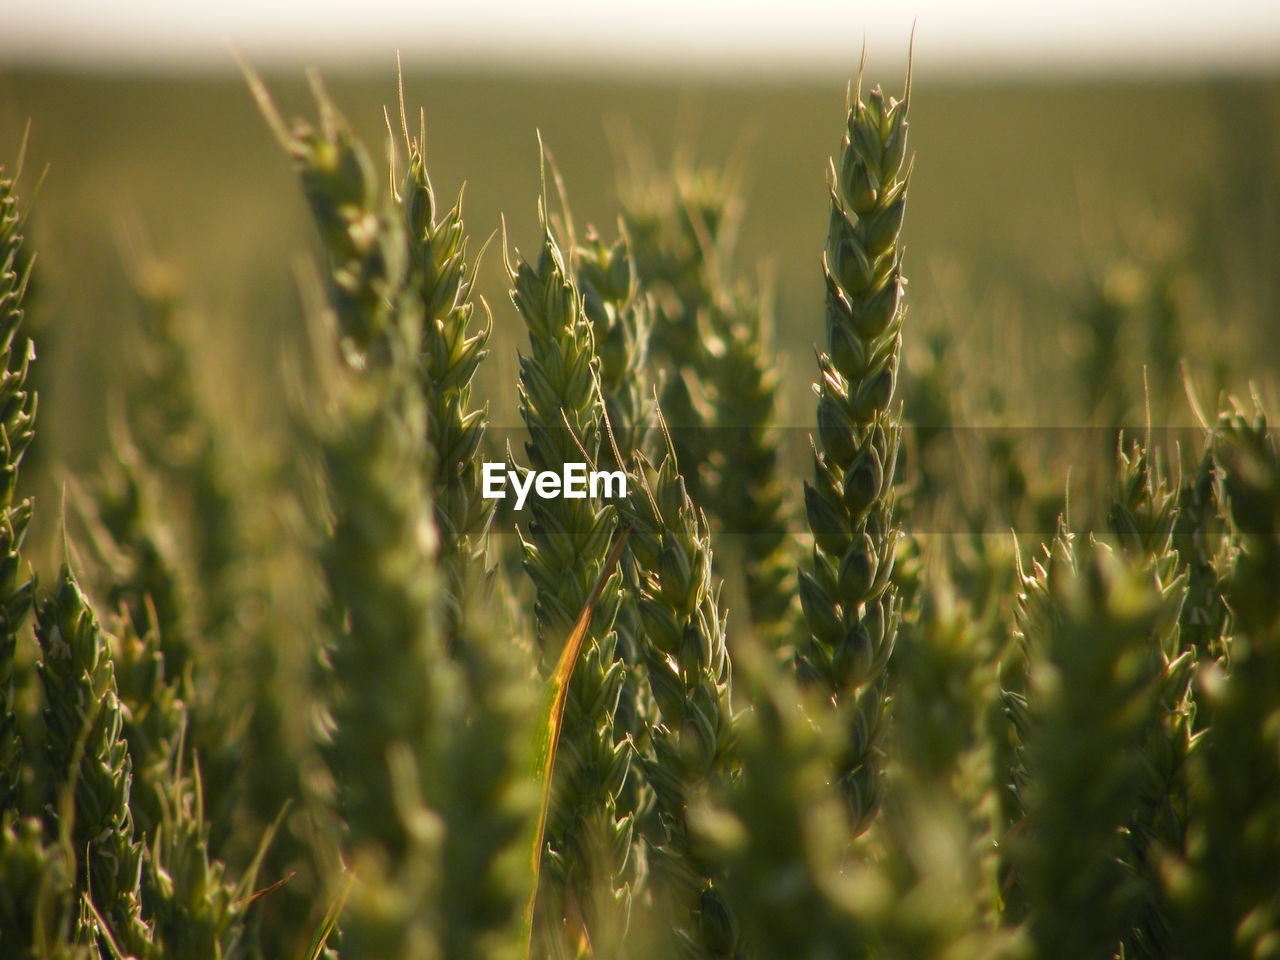 Close-up of wheat crops growing on field